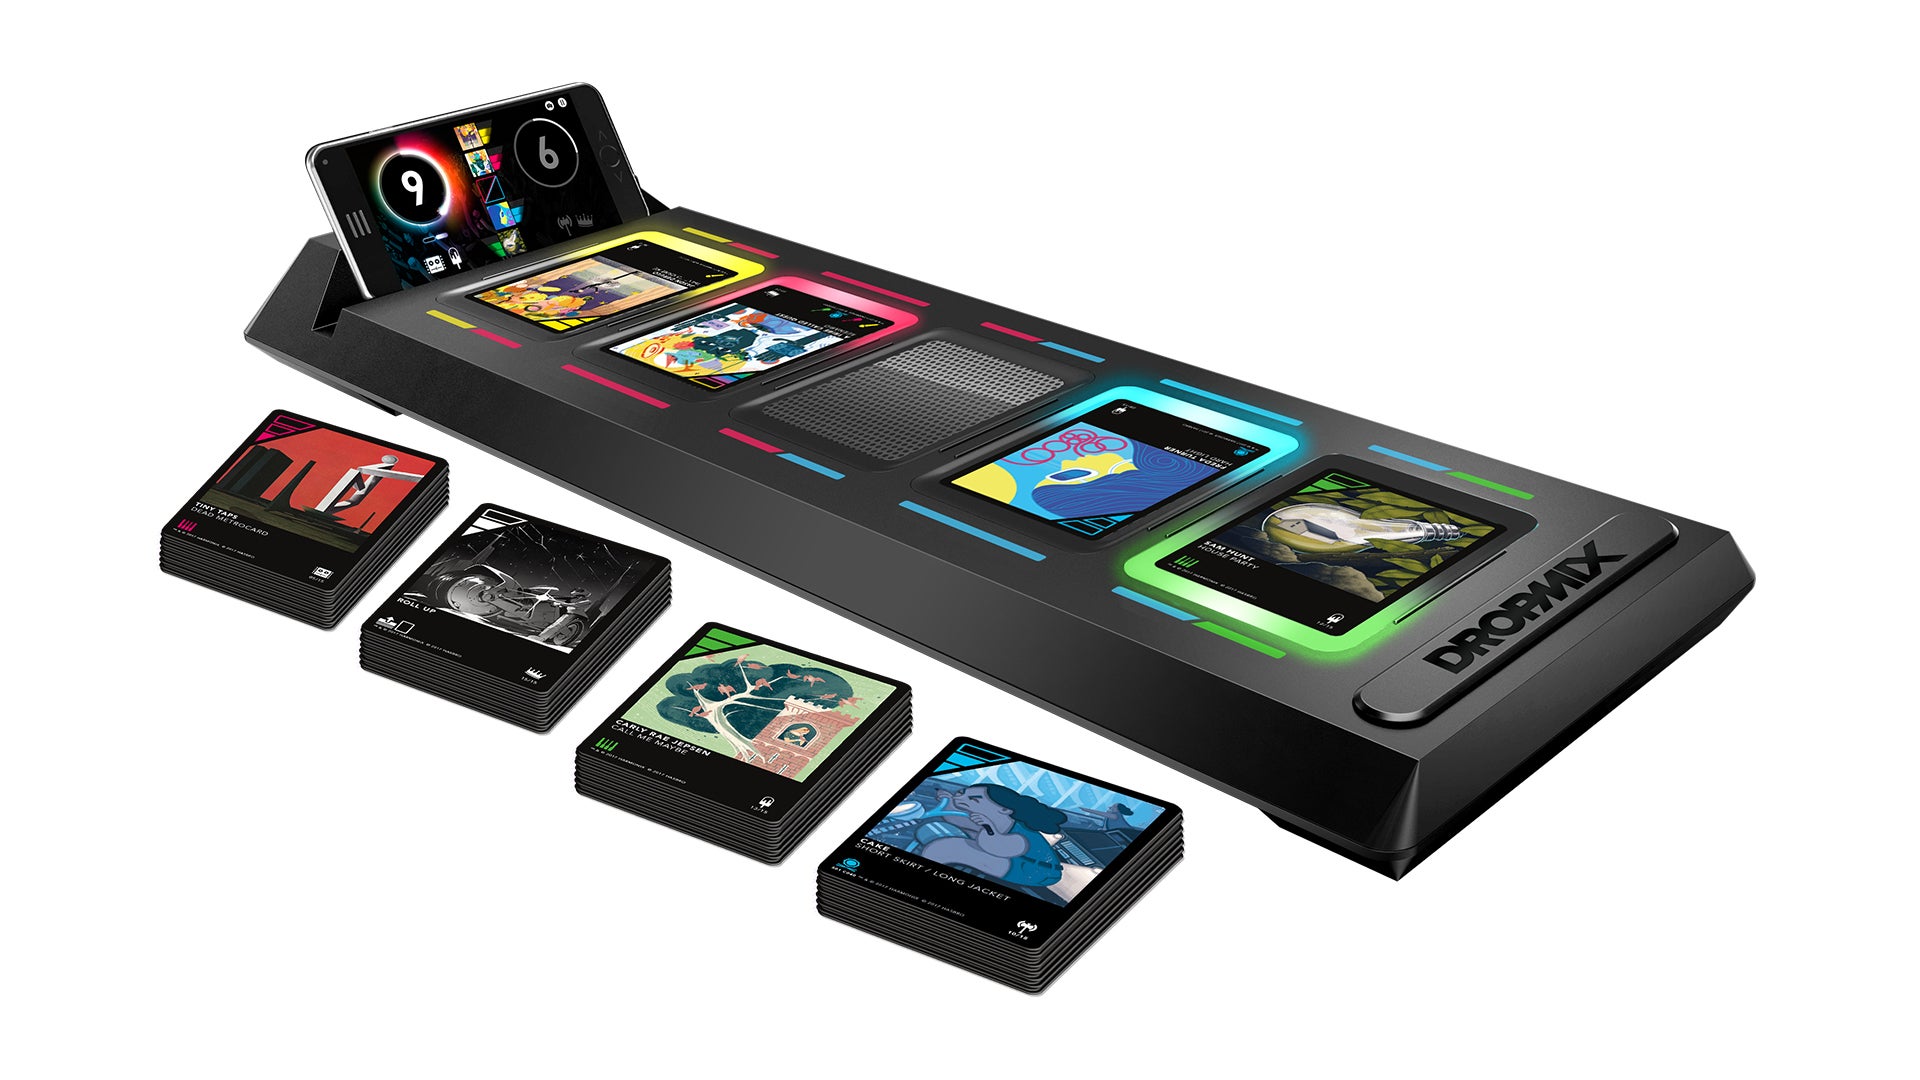 Image for Harmonix's DropMix rhythm board game discounted by $30 this week